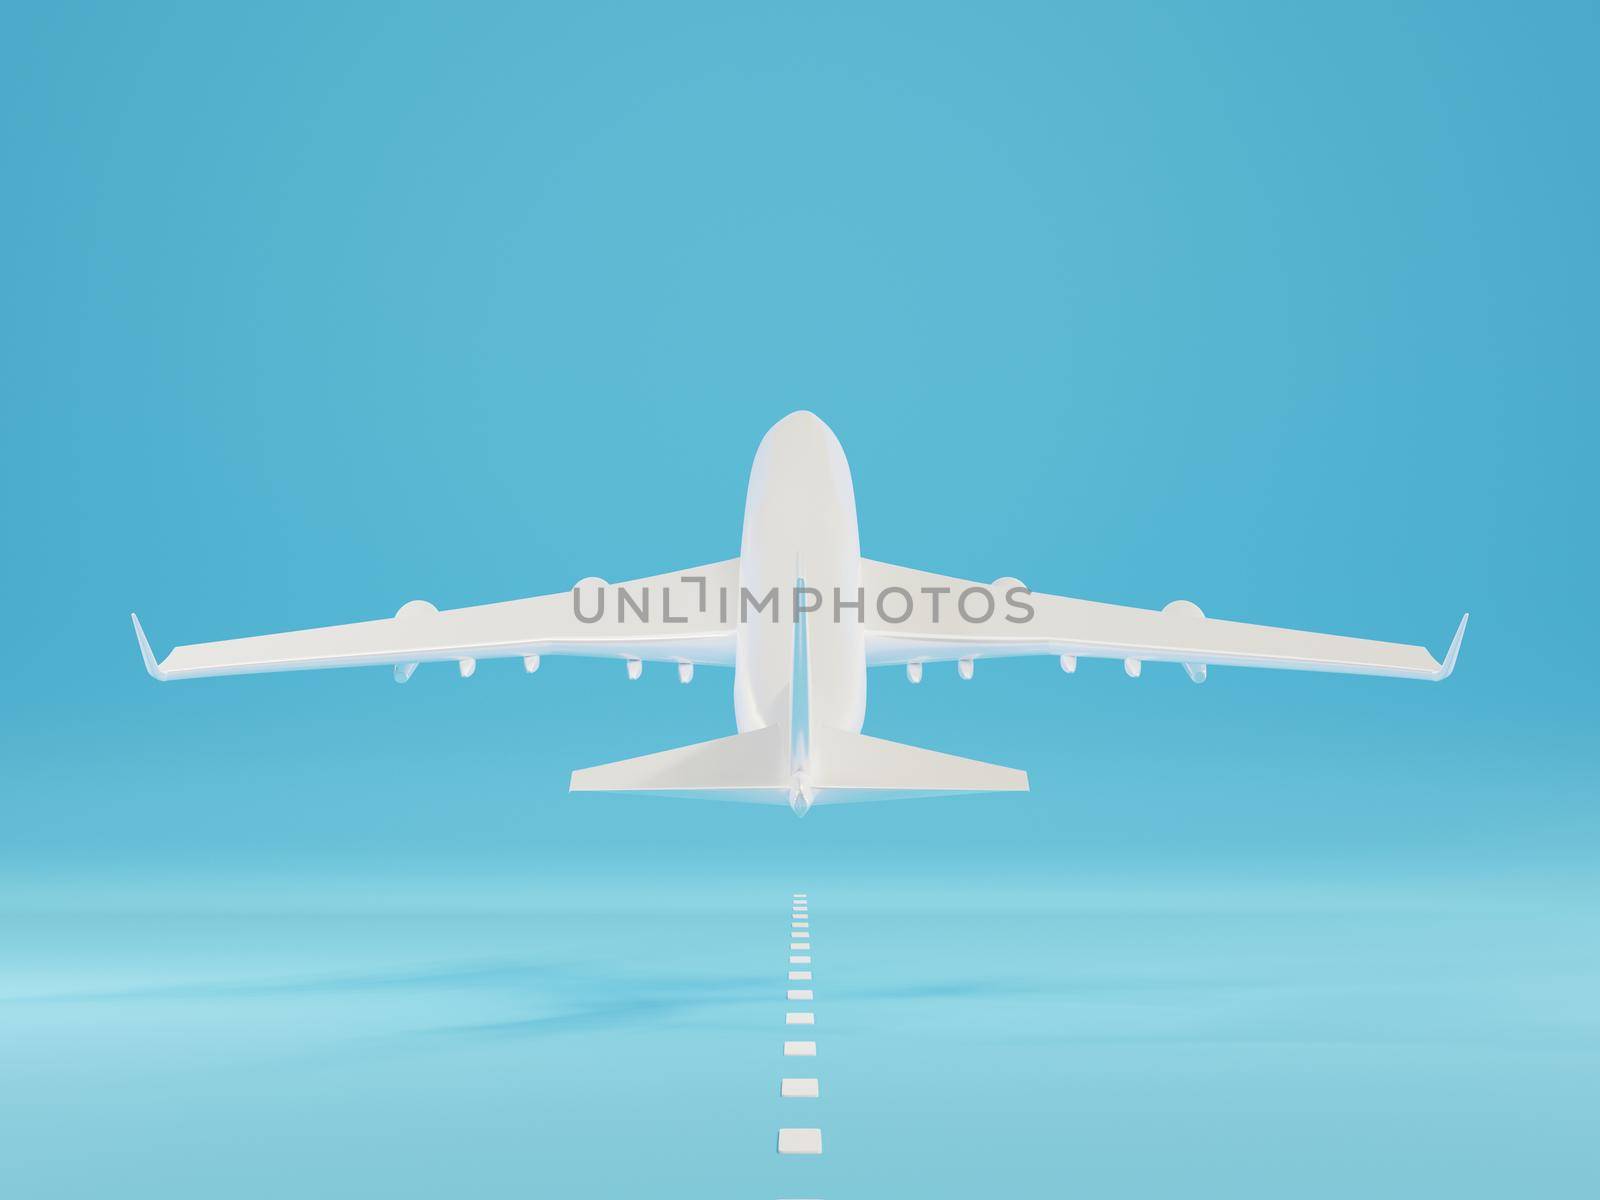 Airplane landing or taking off over ground on runway from the airport by Sorapop